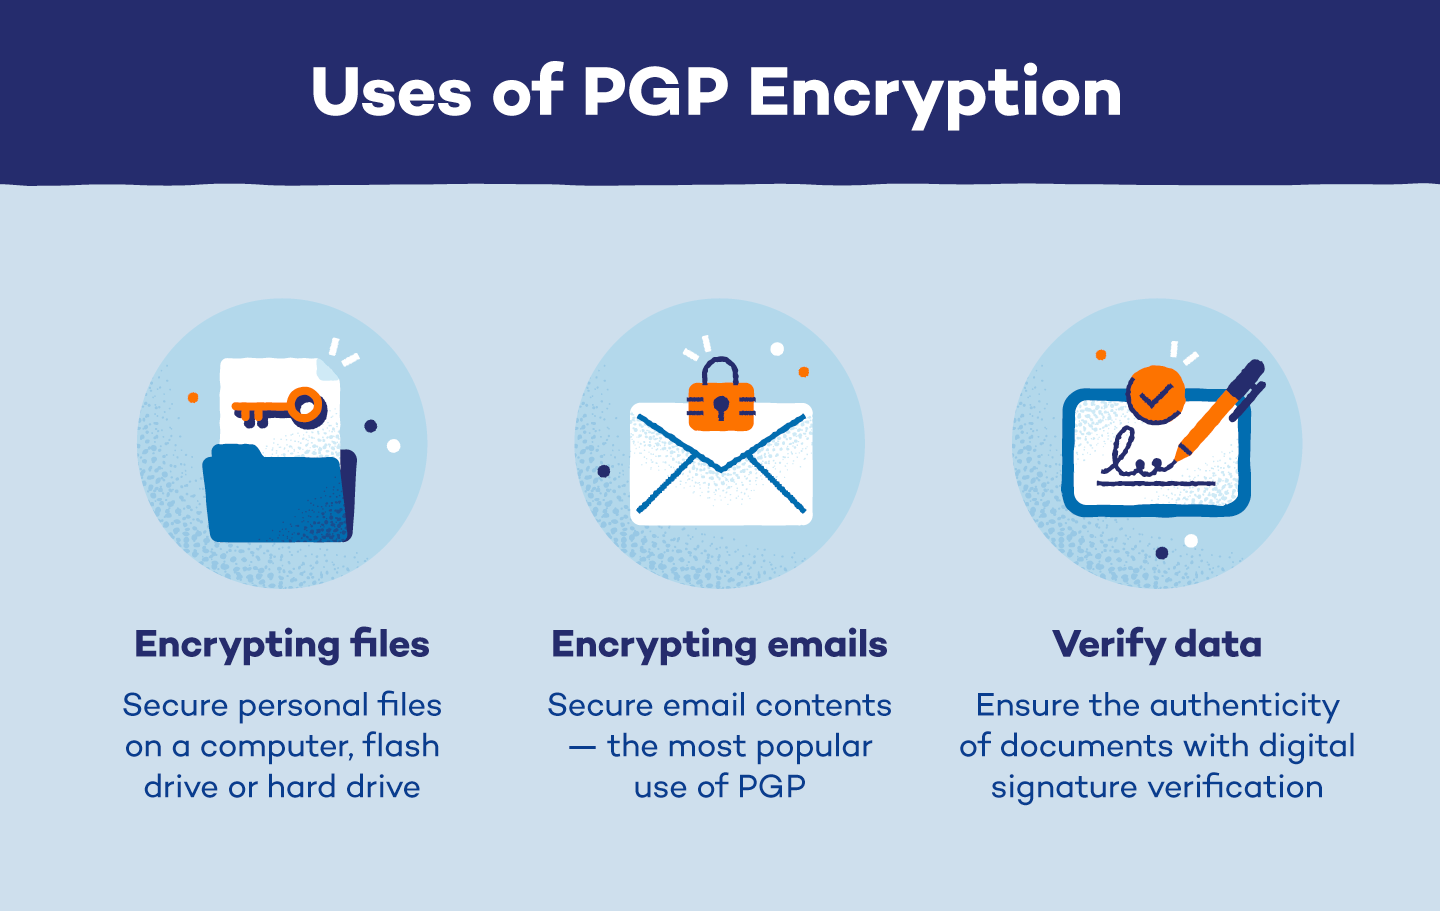 The uses of PGP encryption include file and email encryption and data verification.